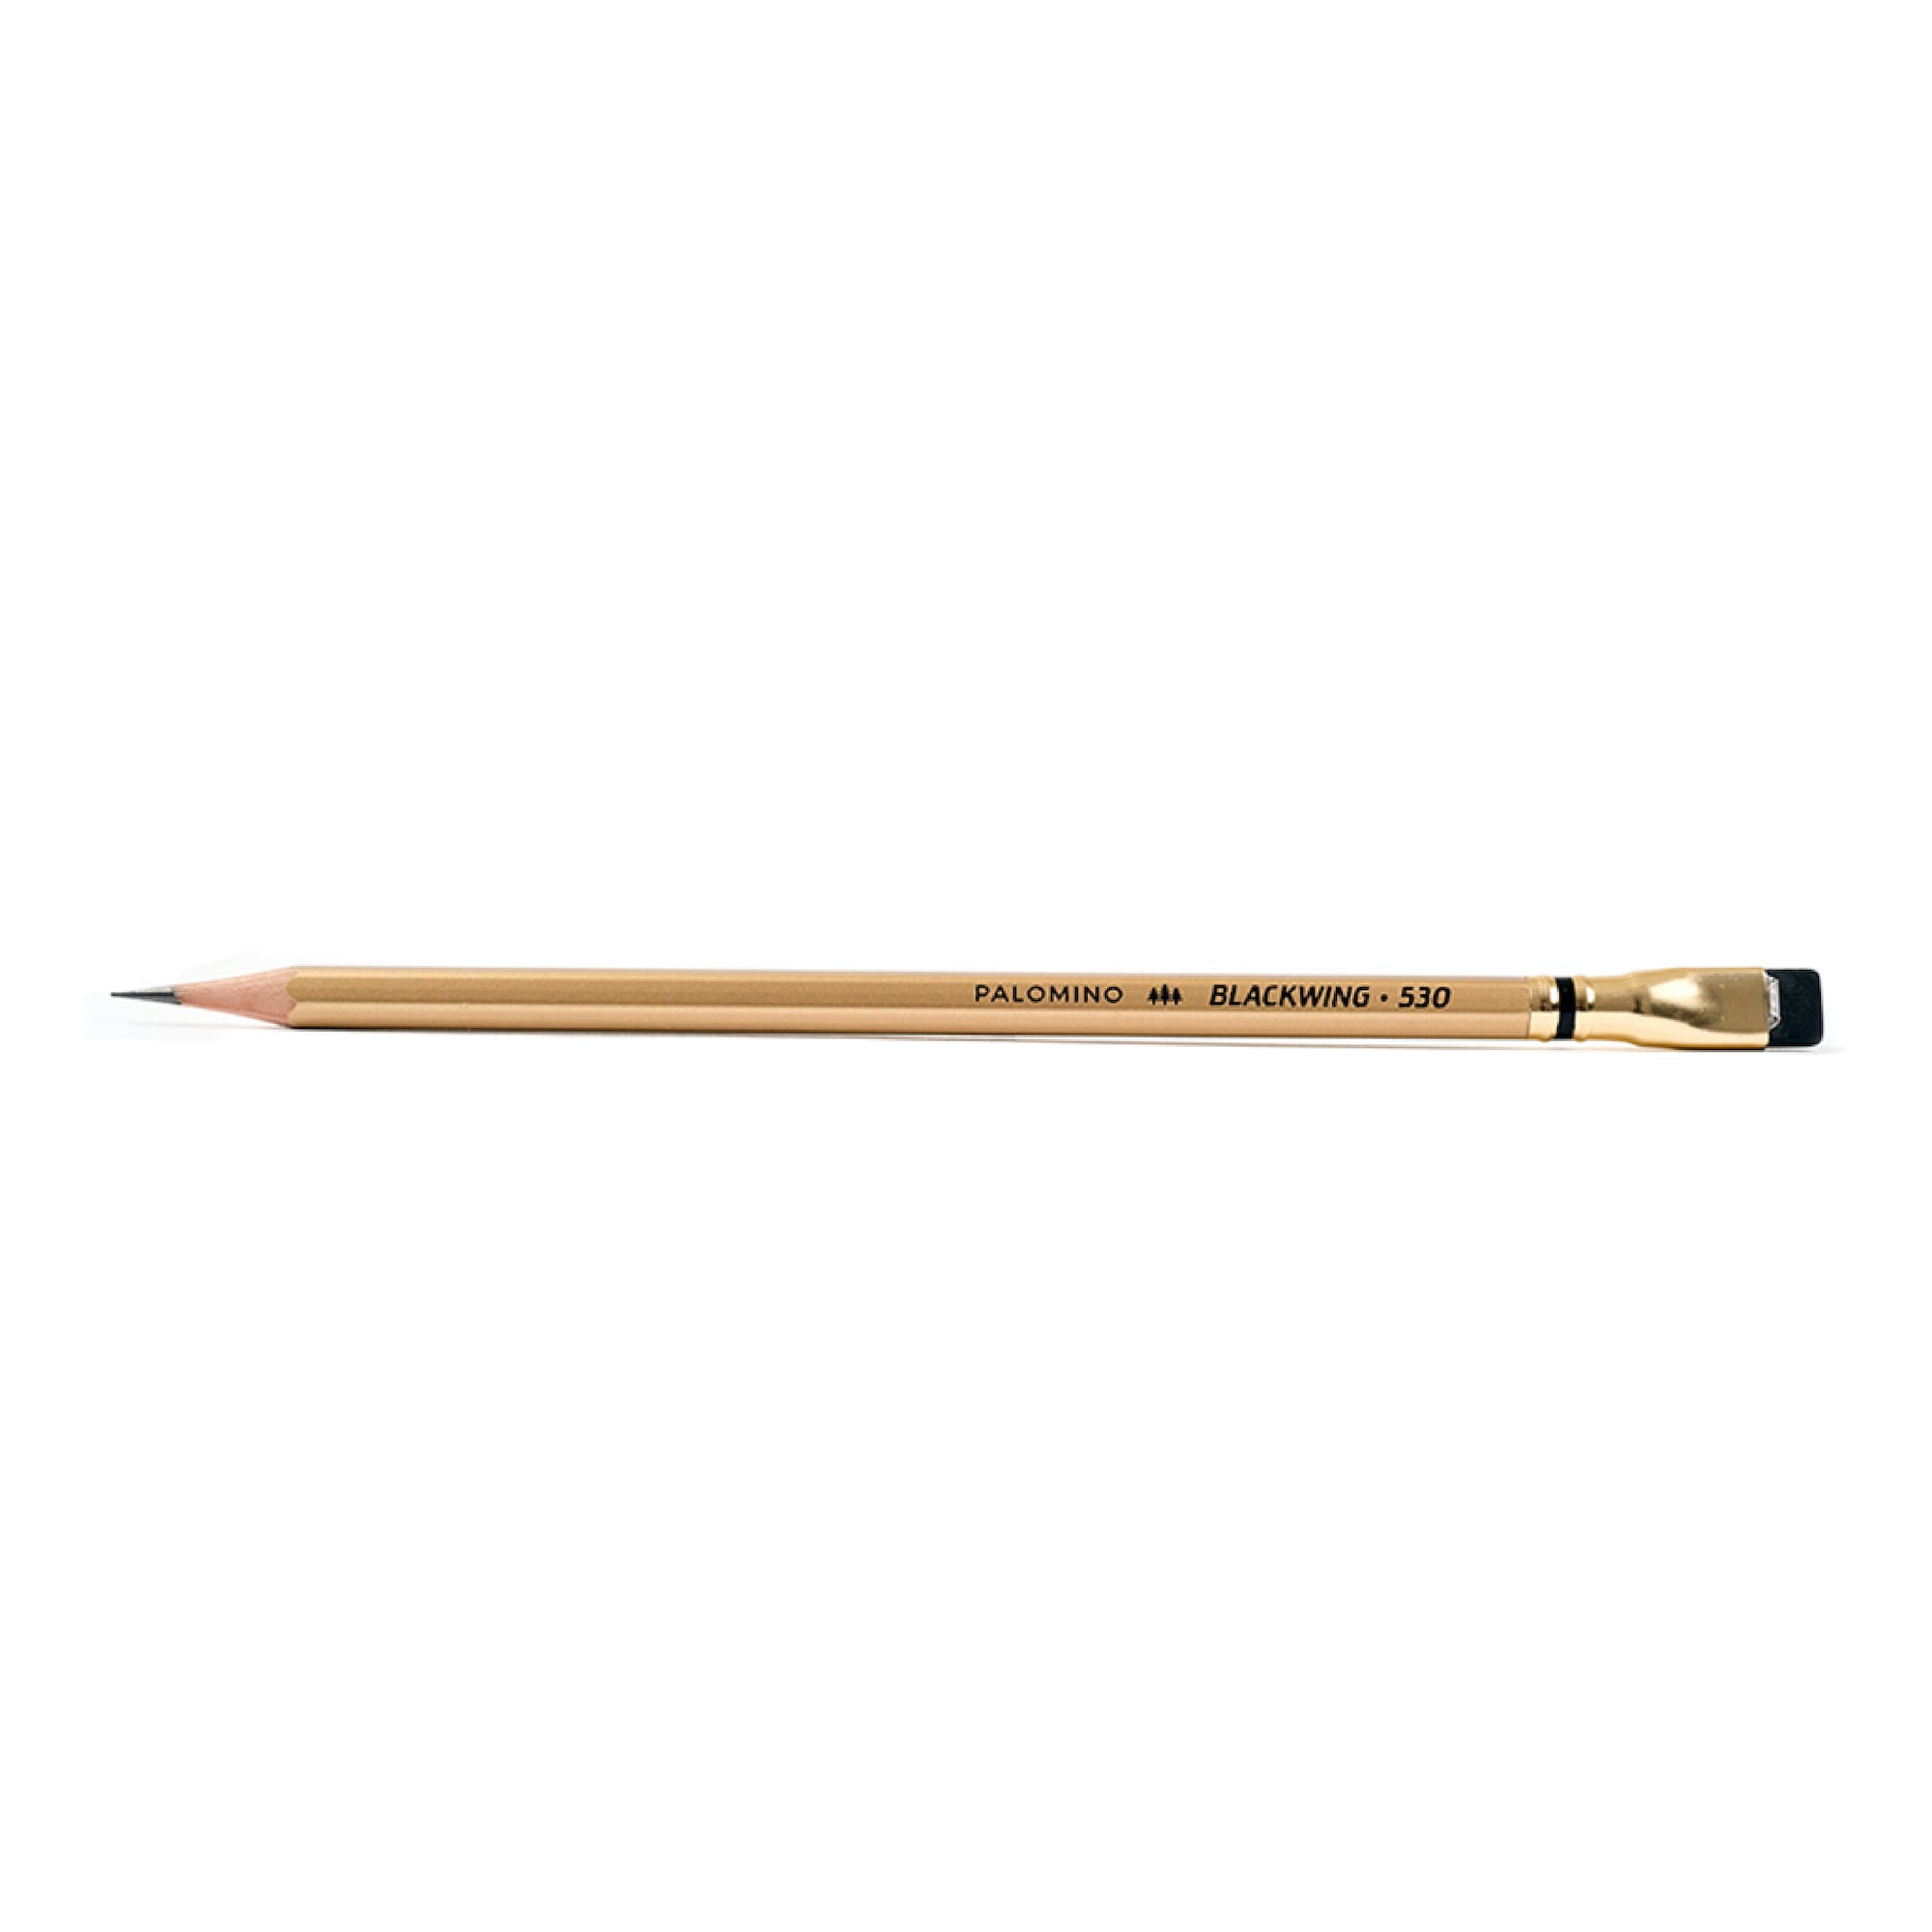 A Blackwing Volume 530 pencil set, inspired by the California Gold Rush, on a white background.